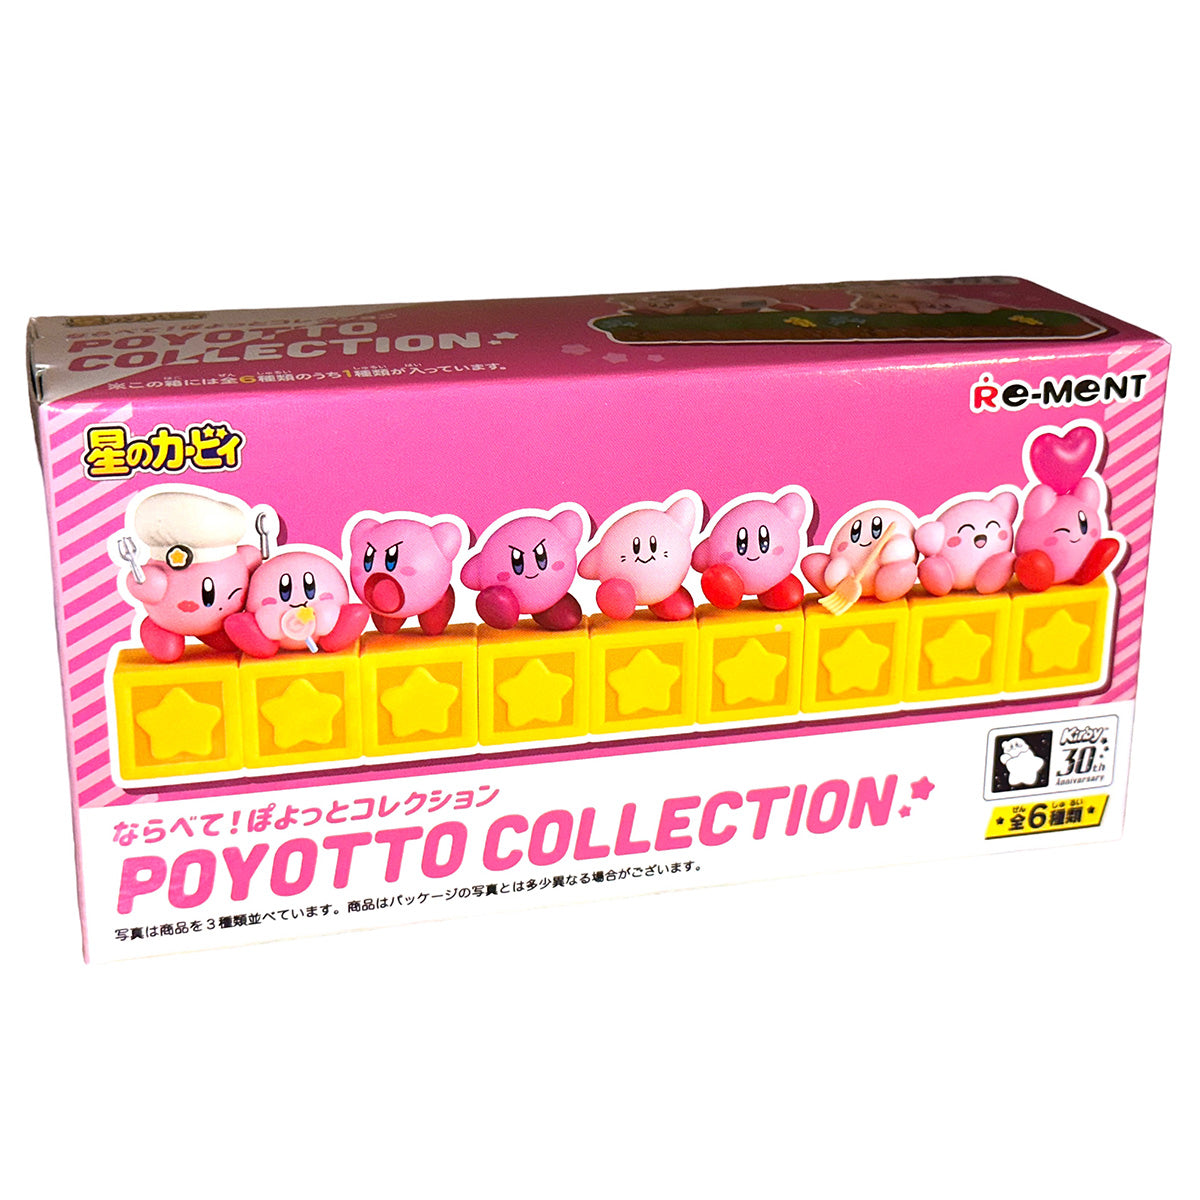 FUN MEMORIES - Kirby 30th Anniversary Poyotto Collection RE-MENT Figure #1 (NEW)